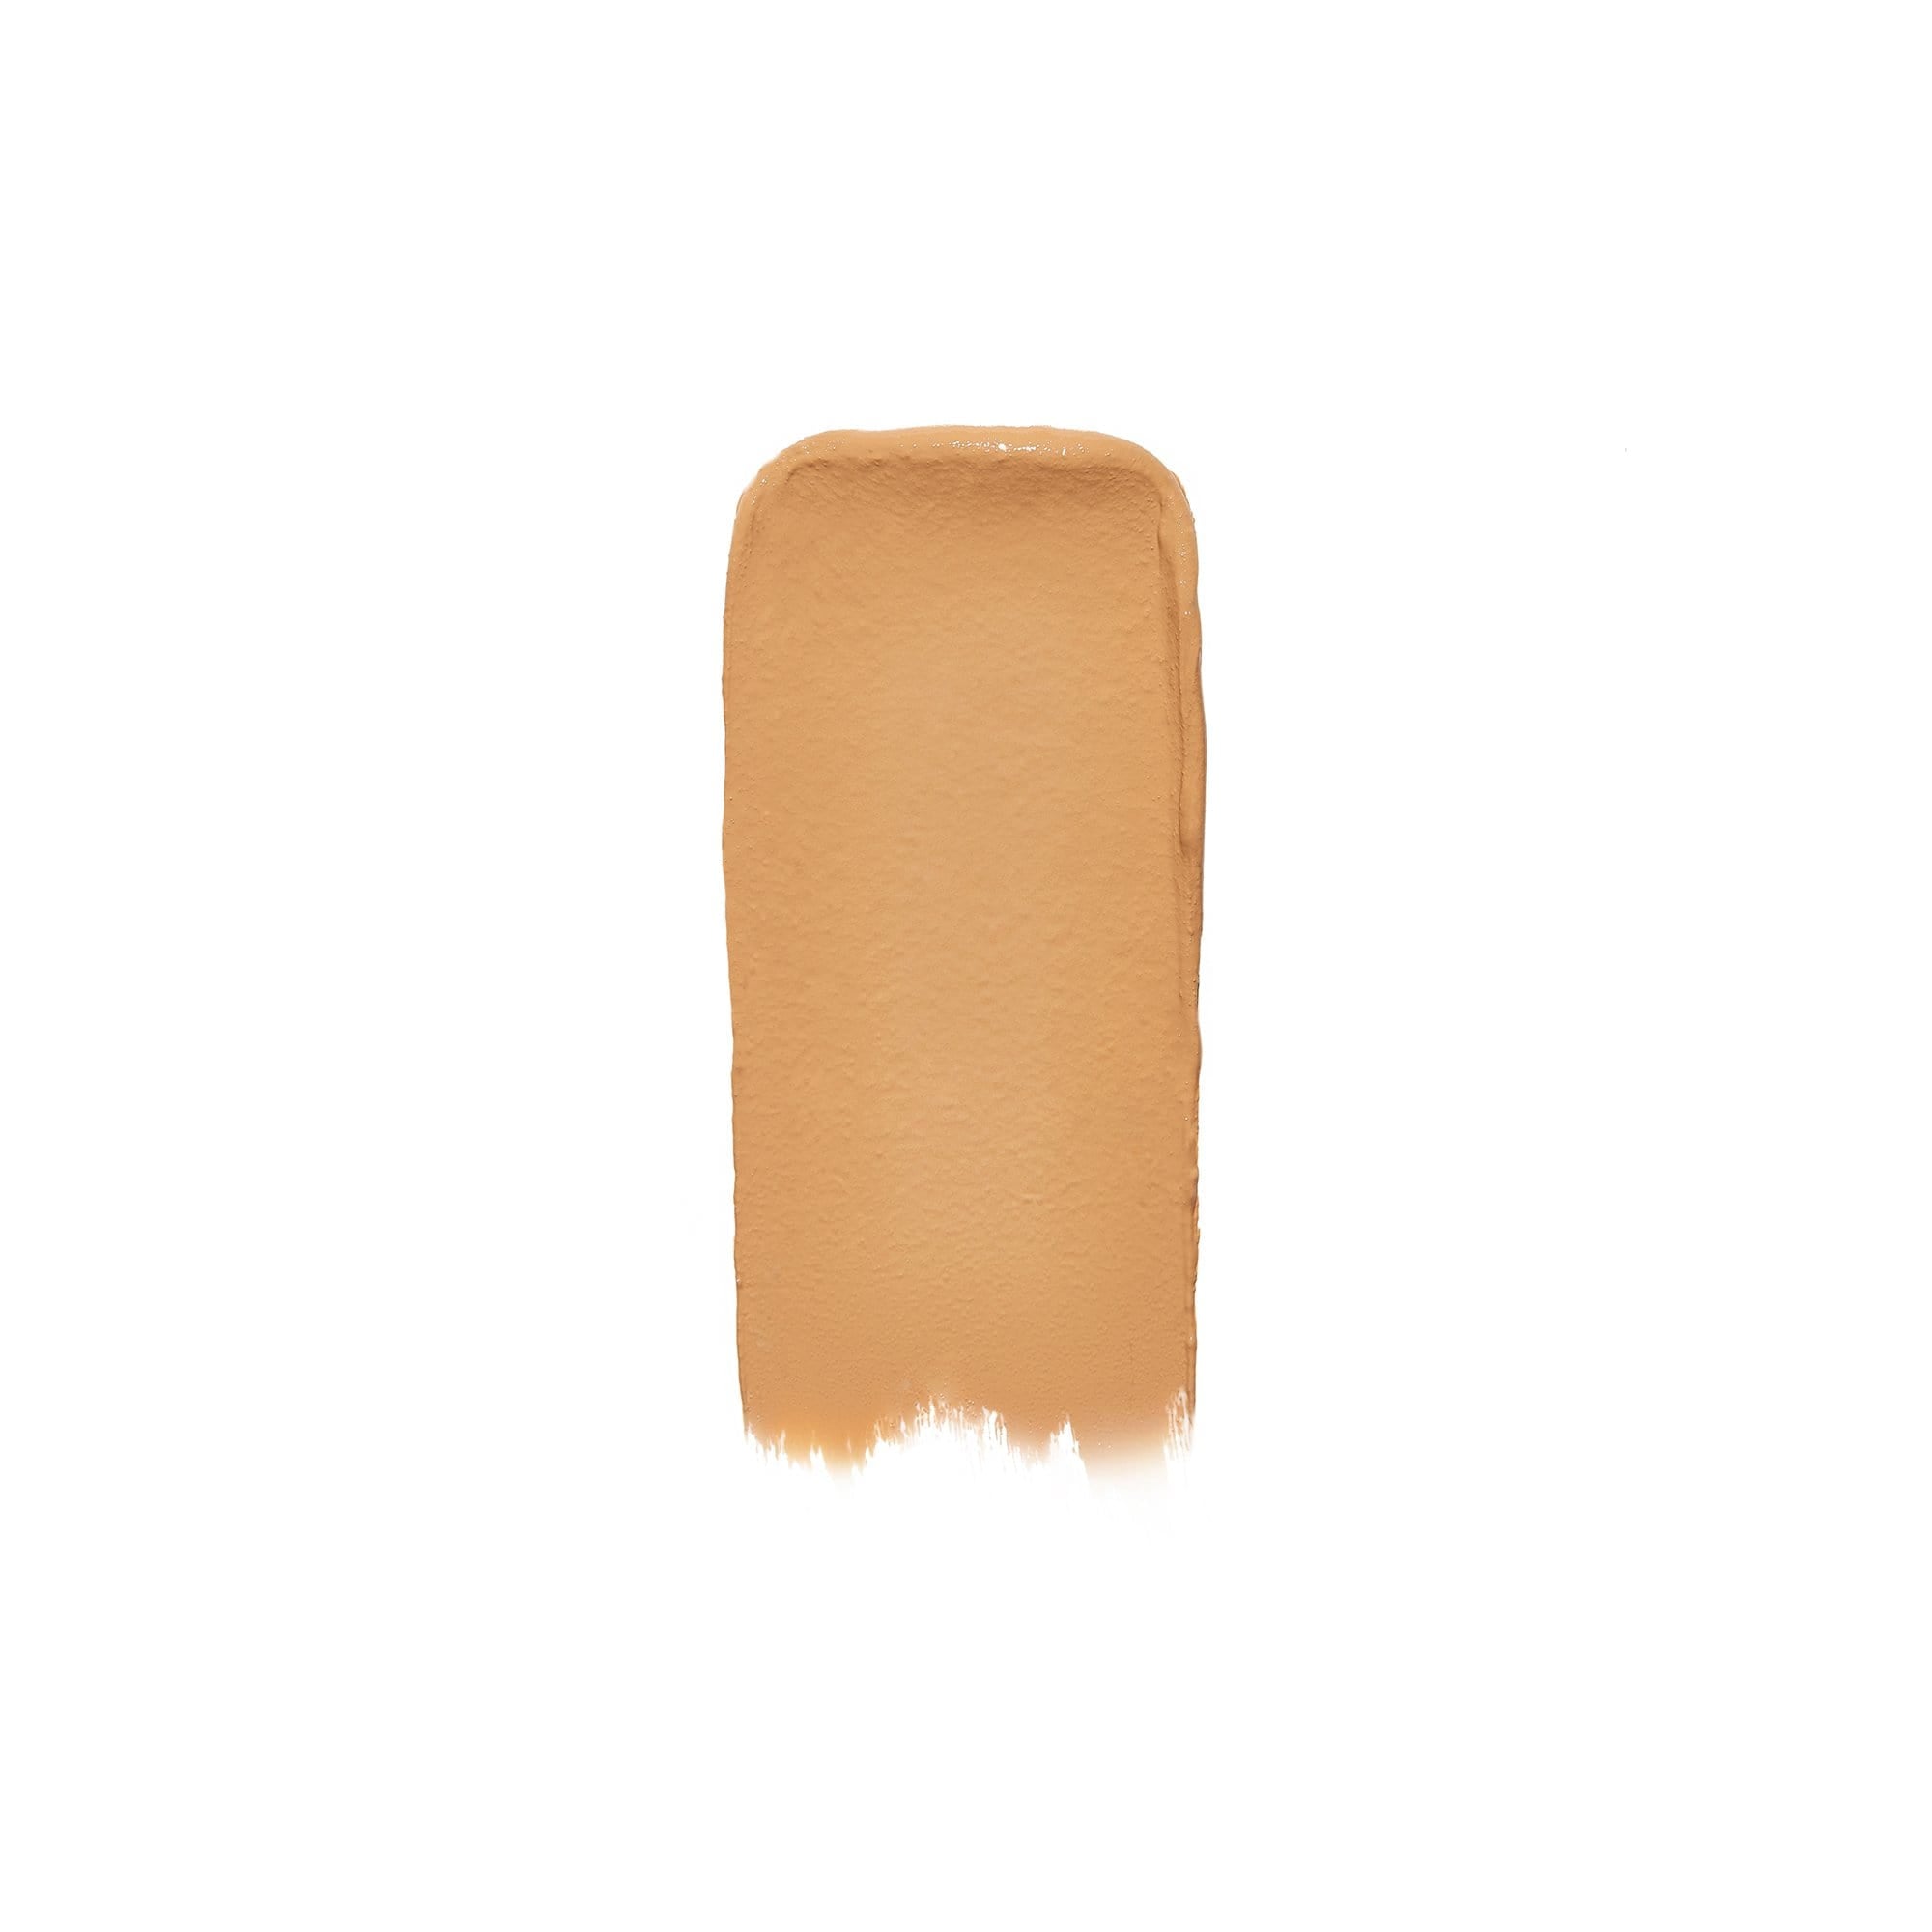 "UN" COVER-UP CONCEALER - The Natural Beauty Club